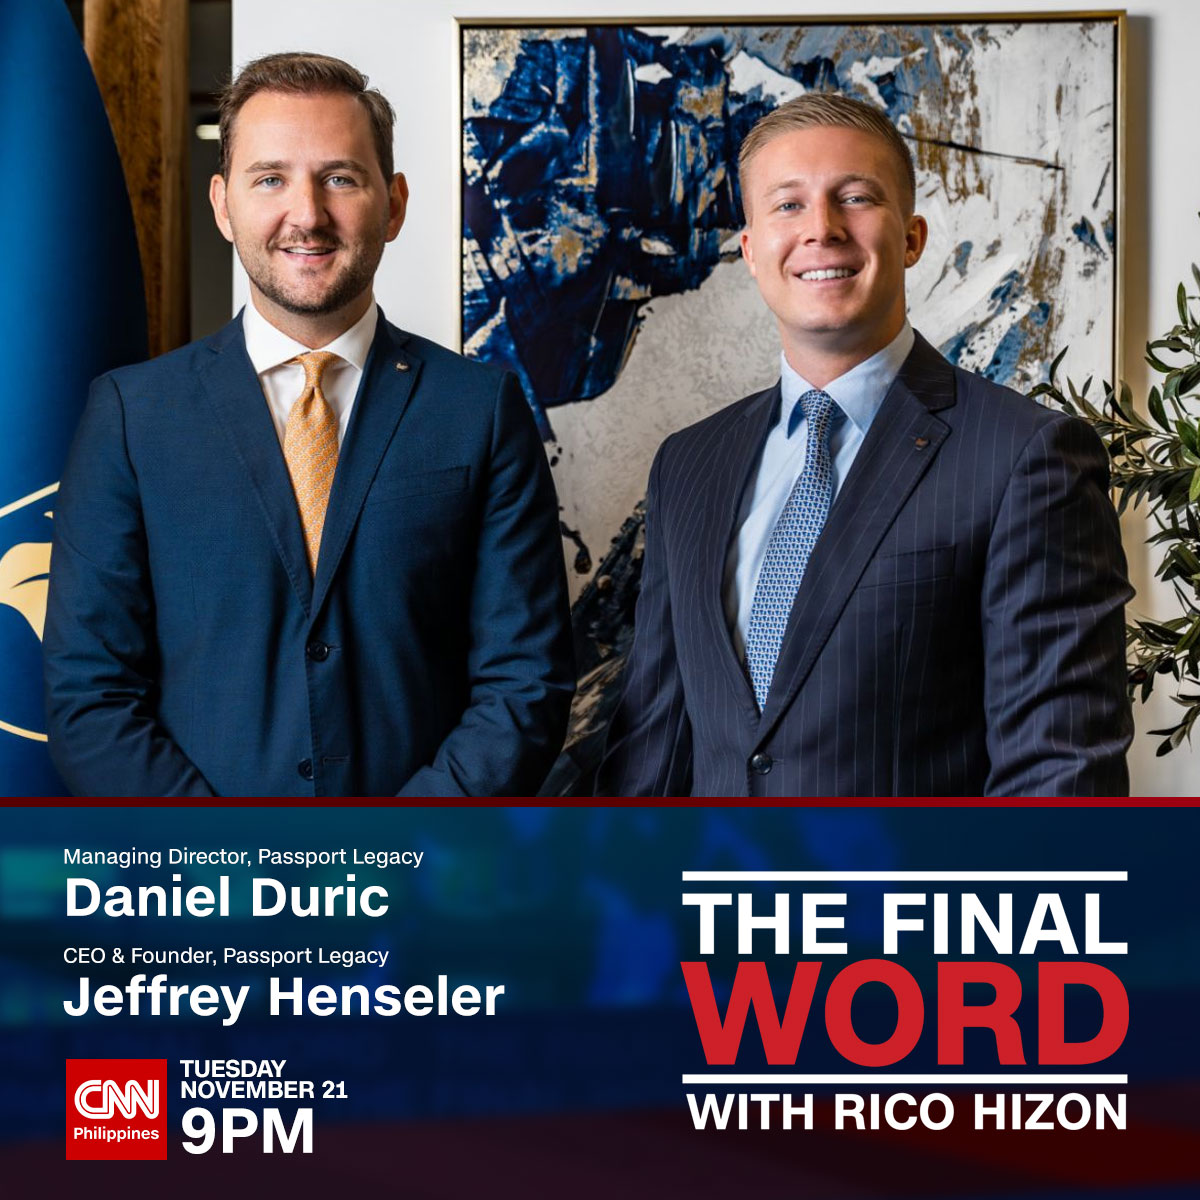 More Filipinos are looking at life overseas especially as the world transitions to a post-COVID normal. One of the ways our kababayans can secure residence or citizenship abroad is investment. Jeffrey Henseler and Daniel Duric of Passport Legacy tell us more on #TheFinalWord…